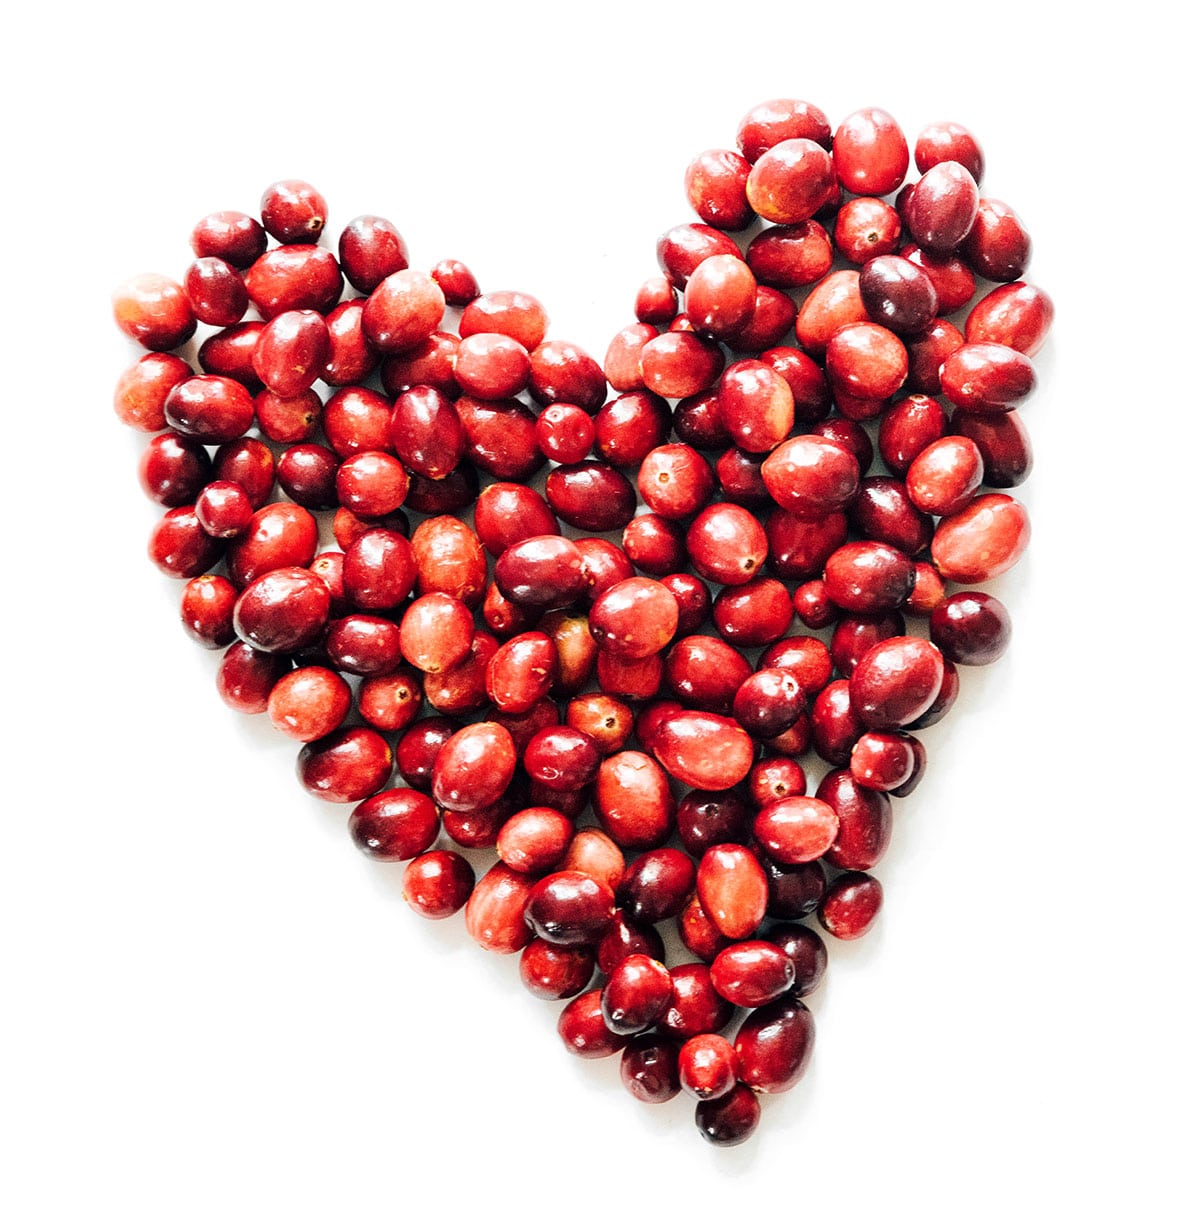 A cup or so of cranberries arranged in a heart shape on a white background